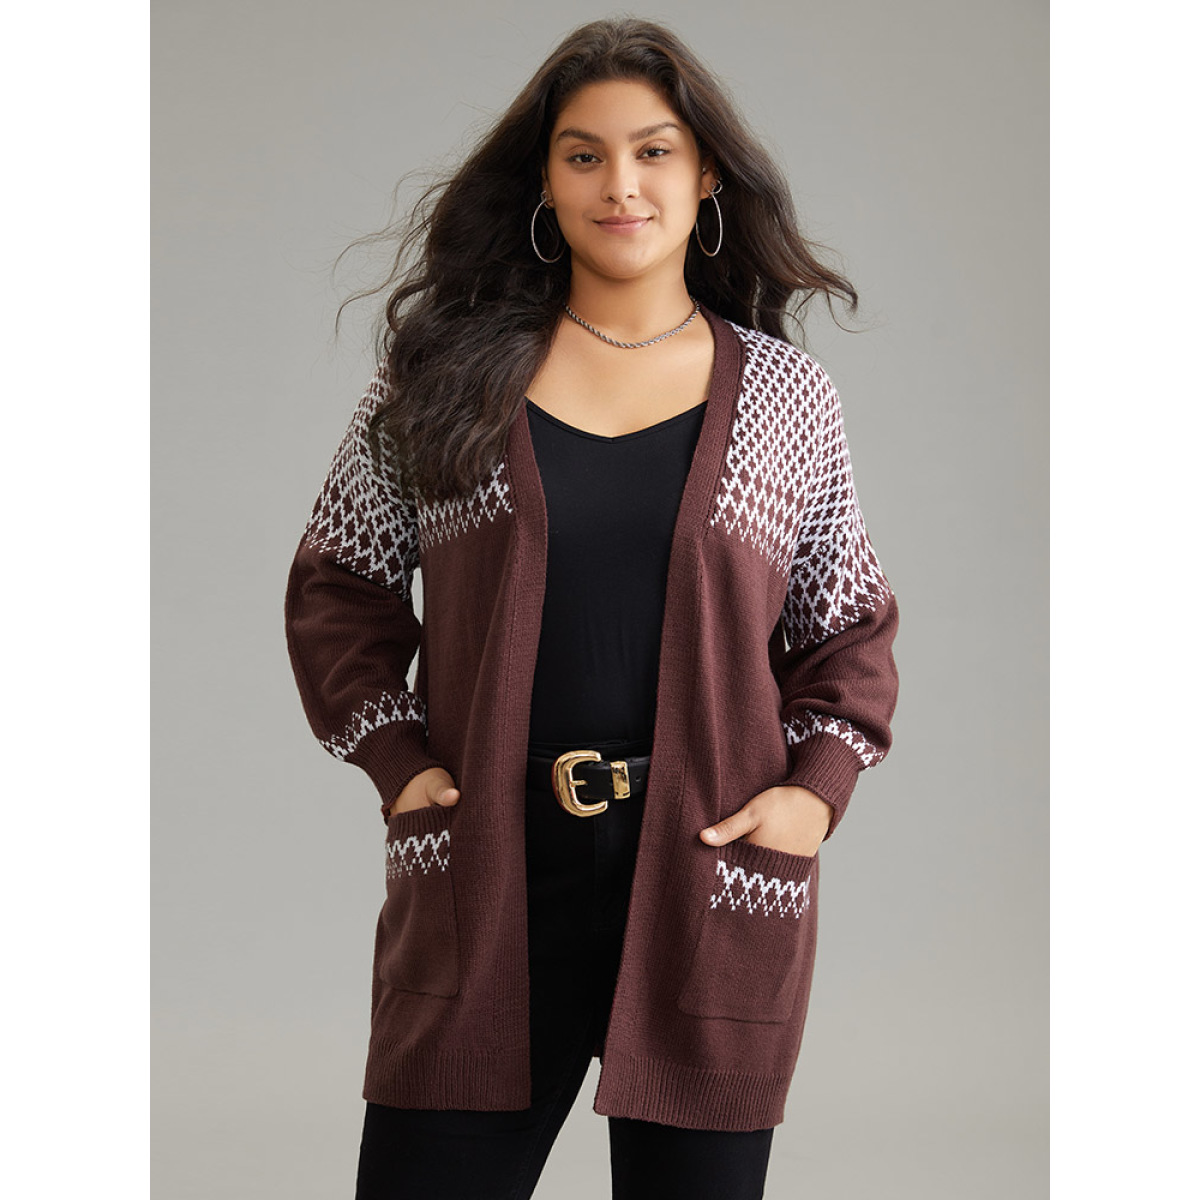 

Plus Size Geometric Contrast Patched Pocket Jacquard Cardigan DarkBrown Women Casual Loose Long Sleeve Dailywear Cardigans BloomChic